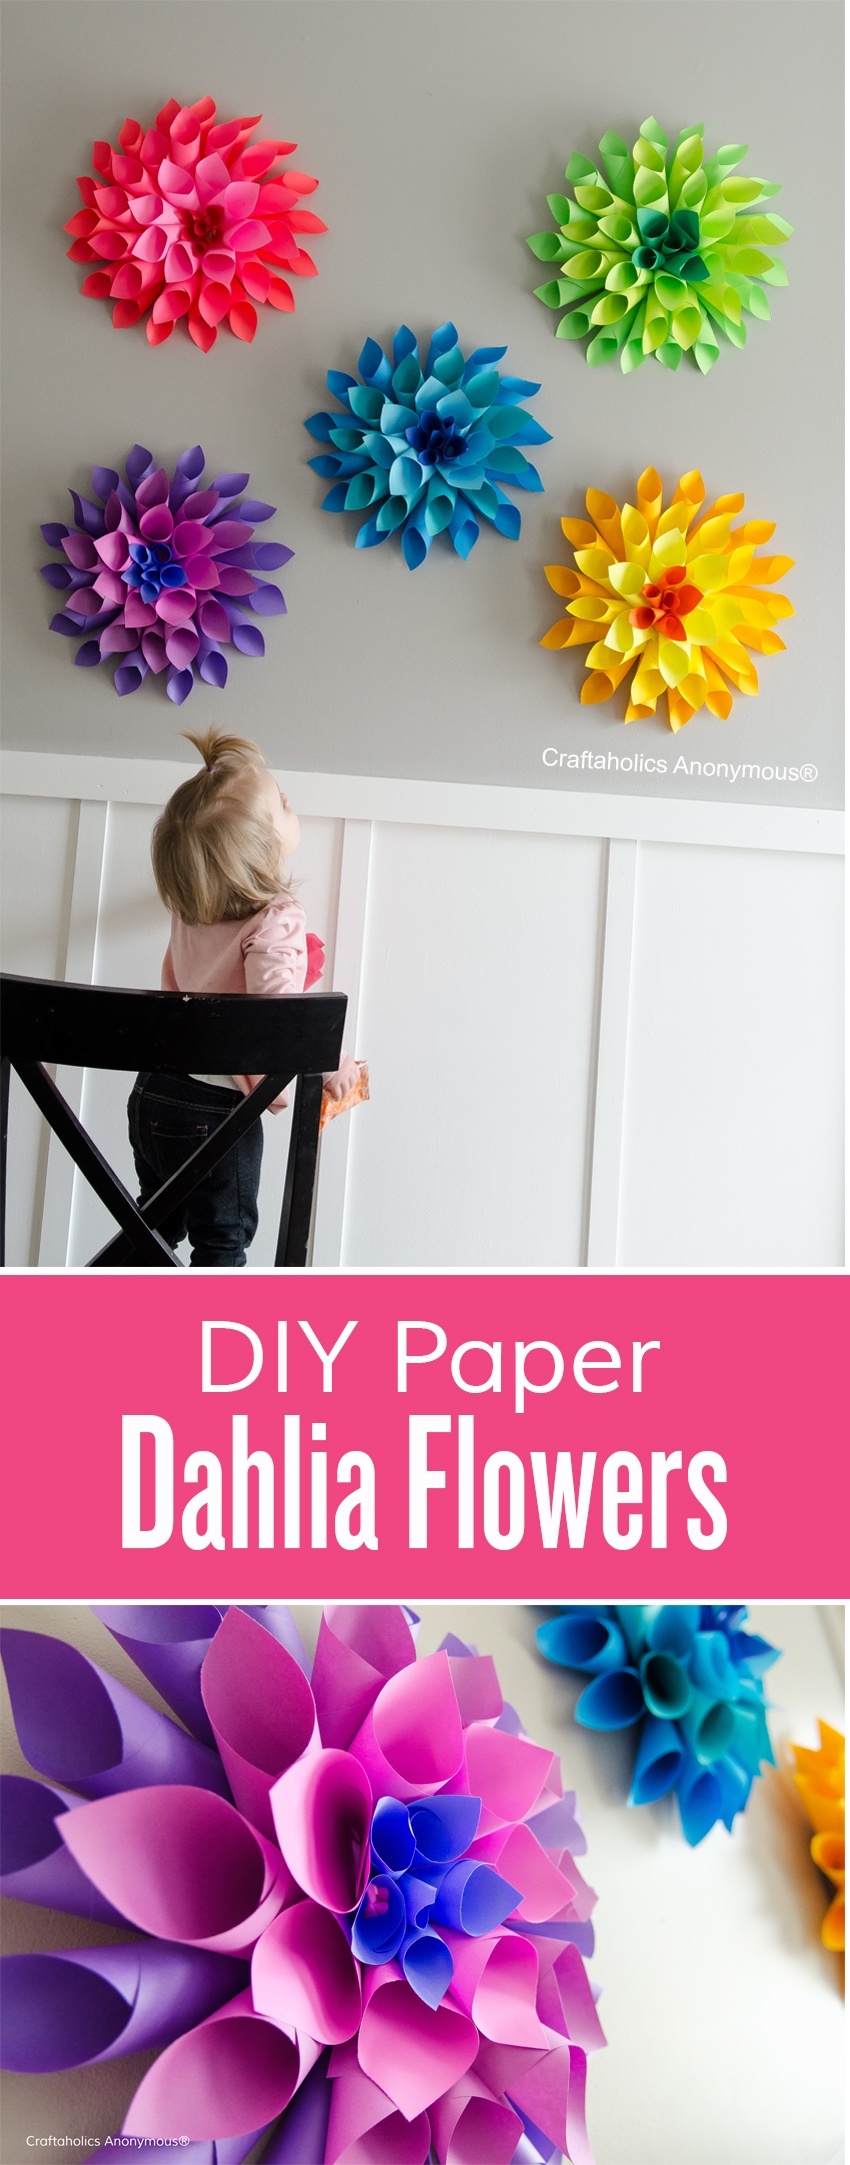 DIY Paper Dahlia Fowers Collage